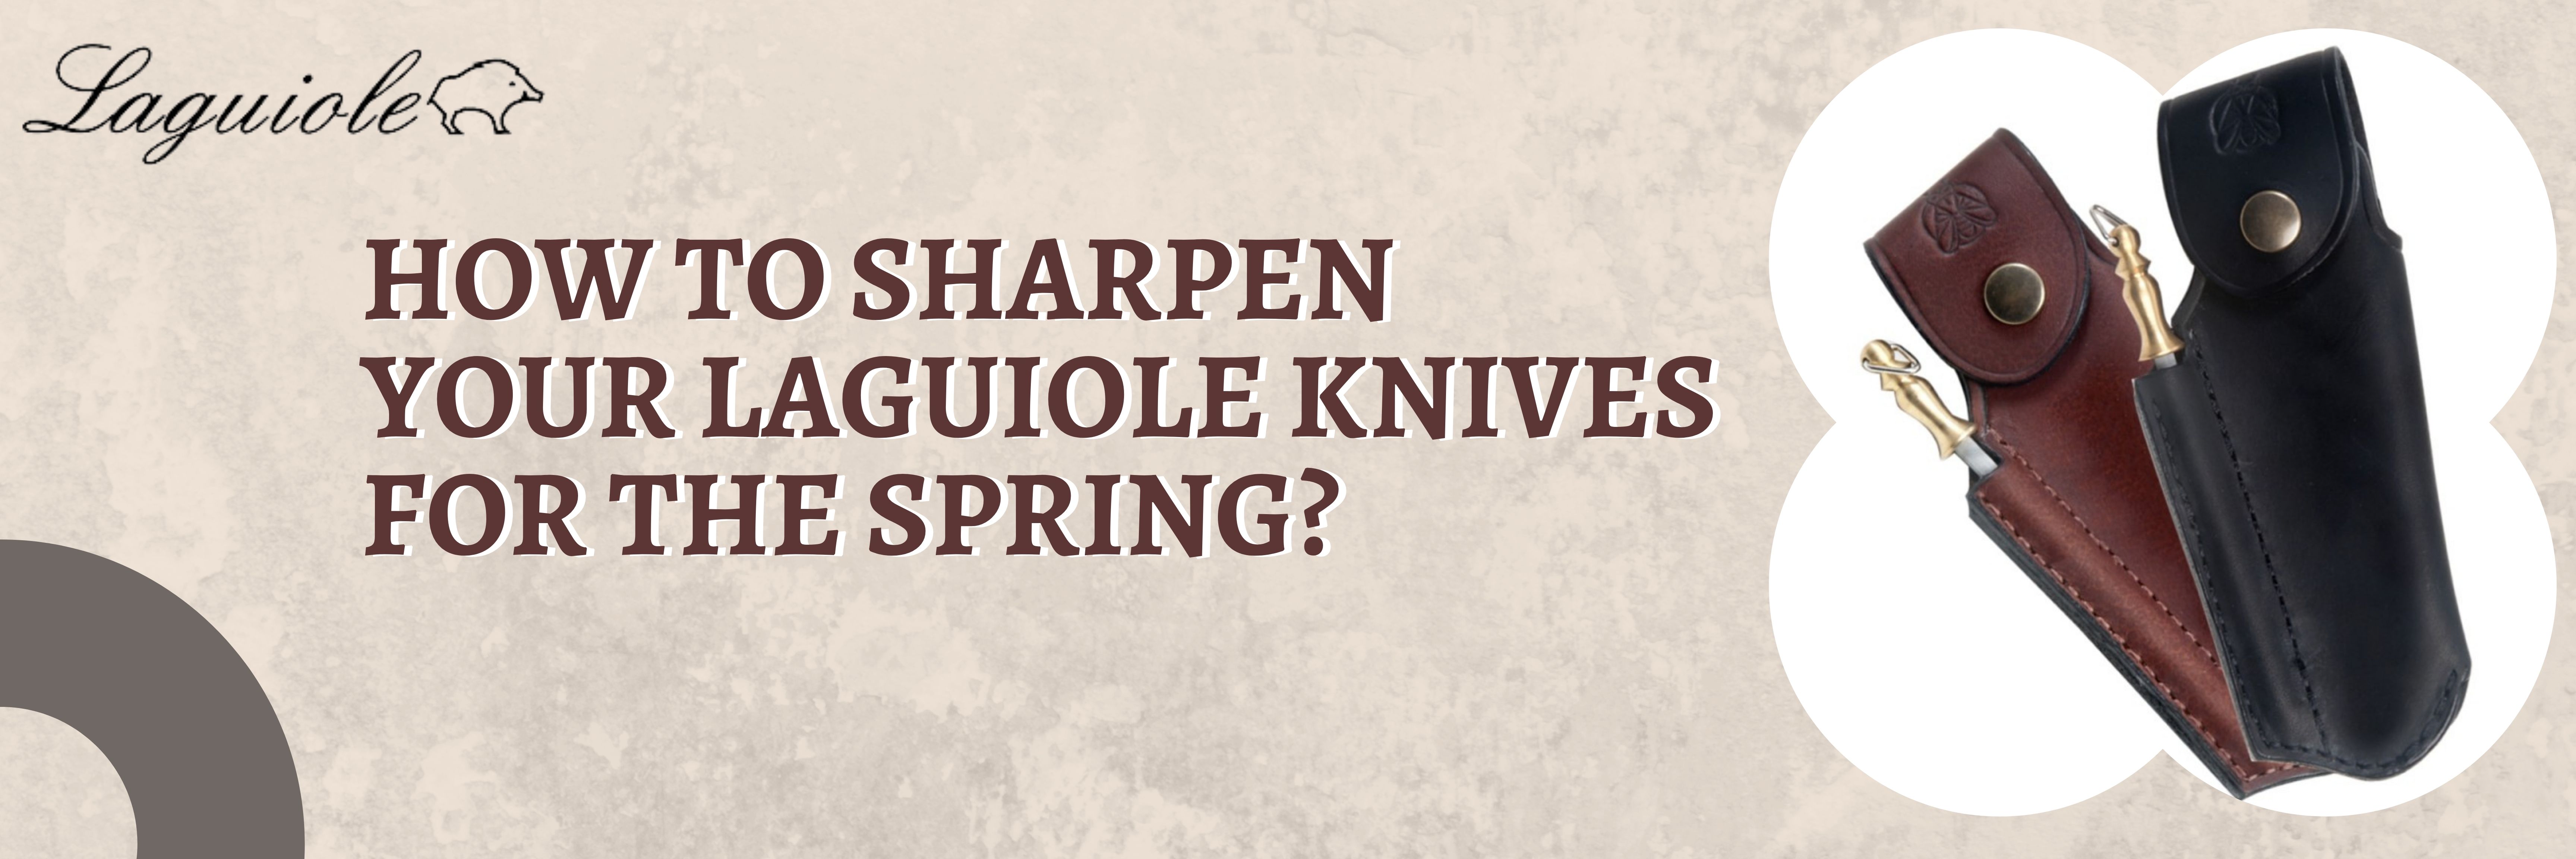 how to sharpen laguiole knives